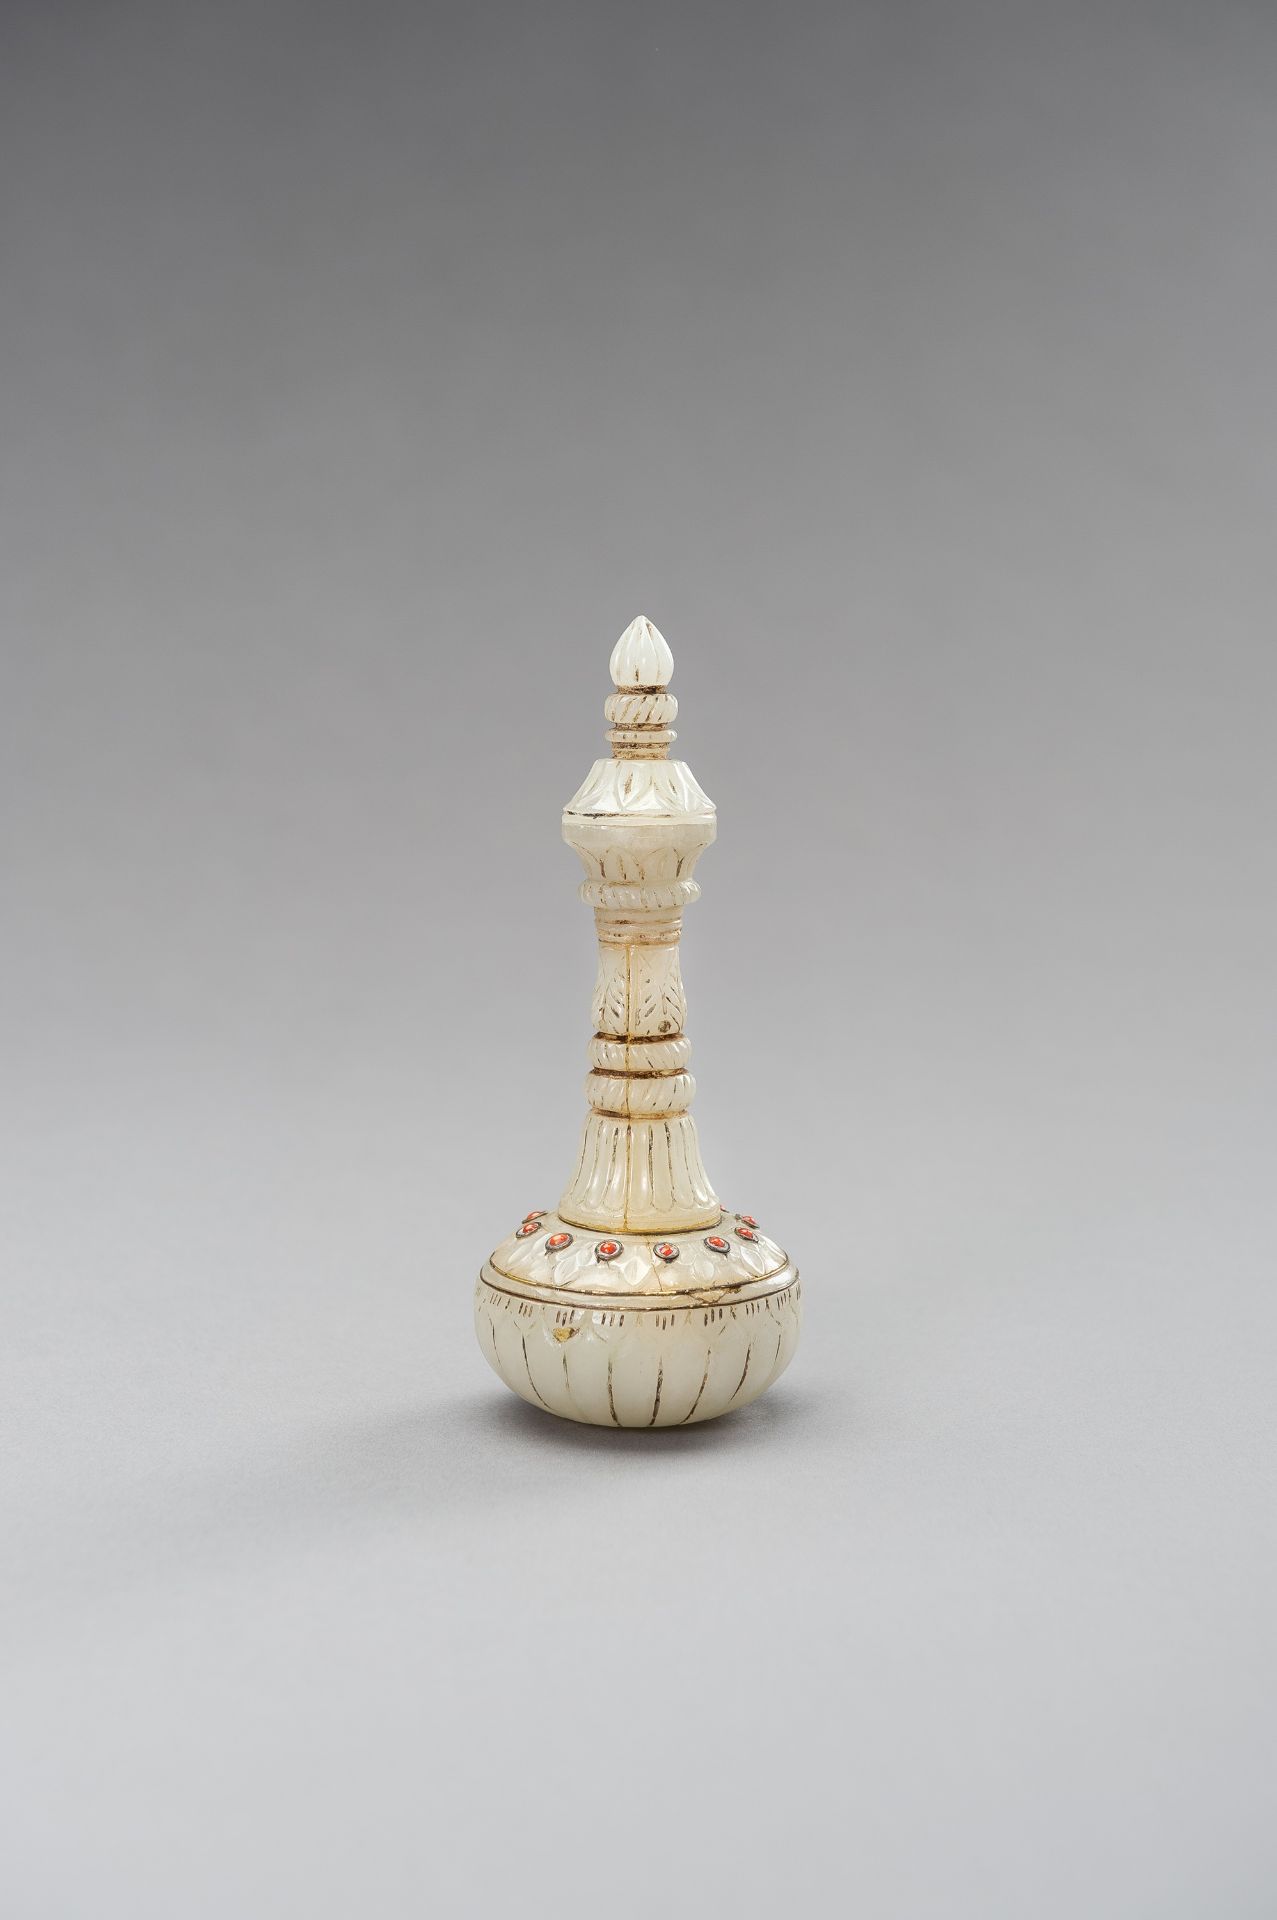 A MUGHAL-STYLE CORAL SET AGATE MINIATURE FLASK - Image 2 of 12